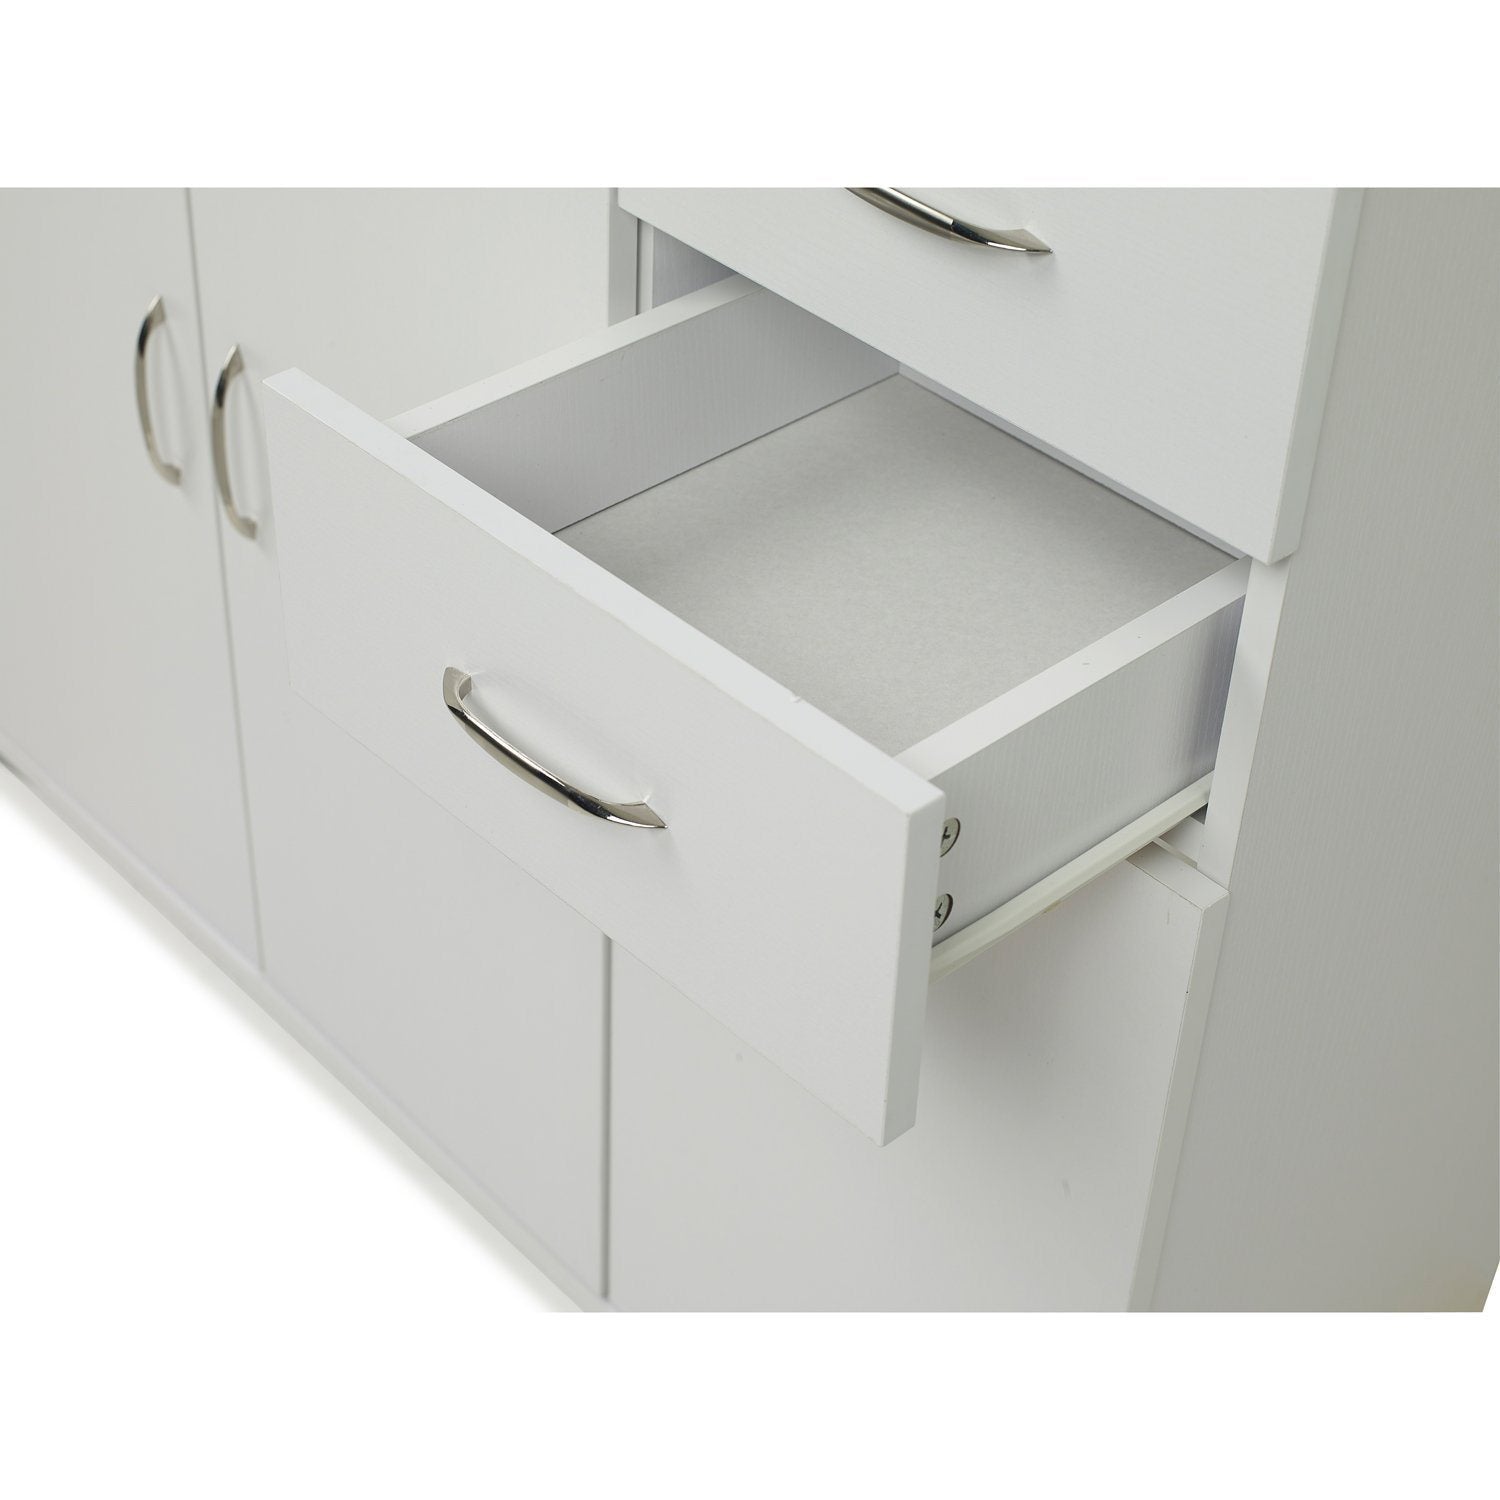 Home Office Cupboard Cabinet in White - Laura James